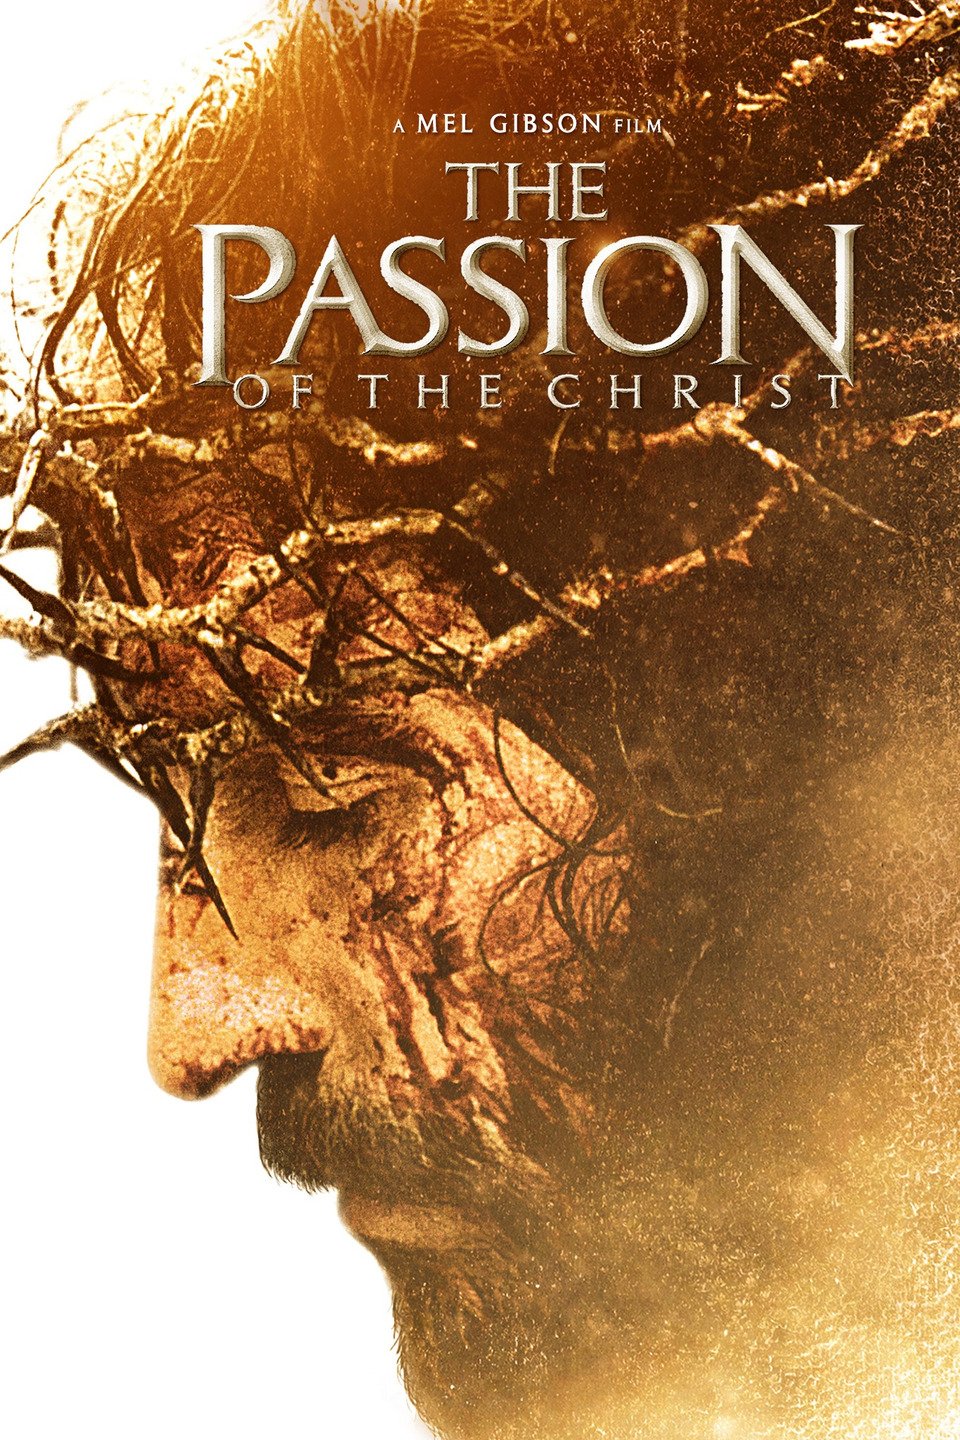 how do people feel about the passion of christ movie